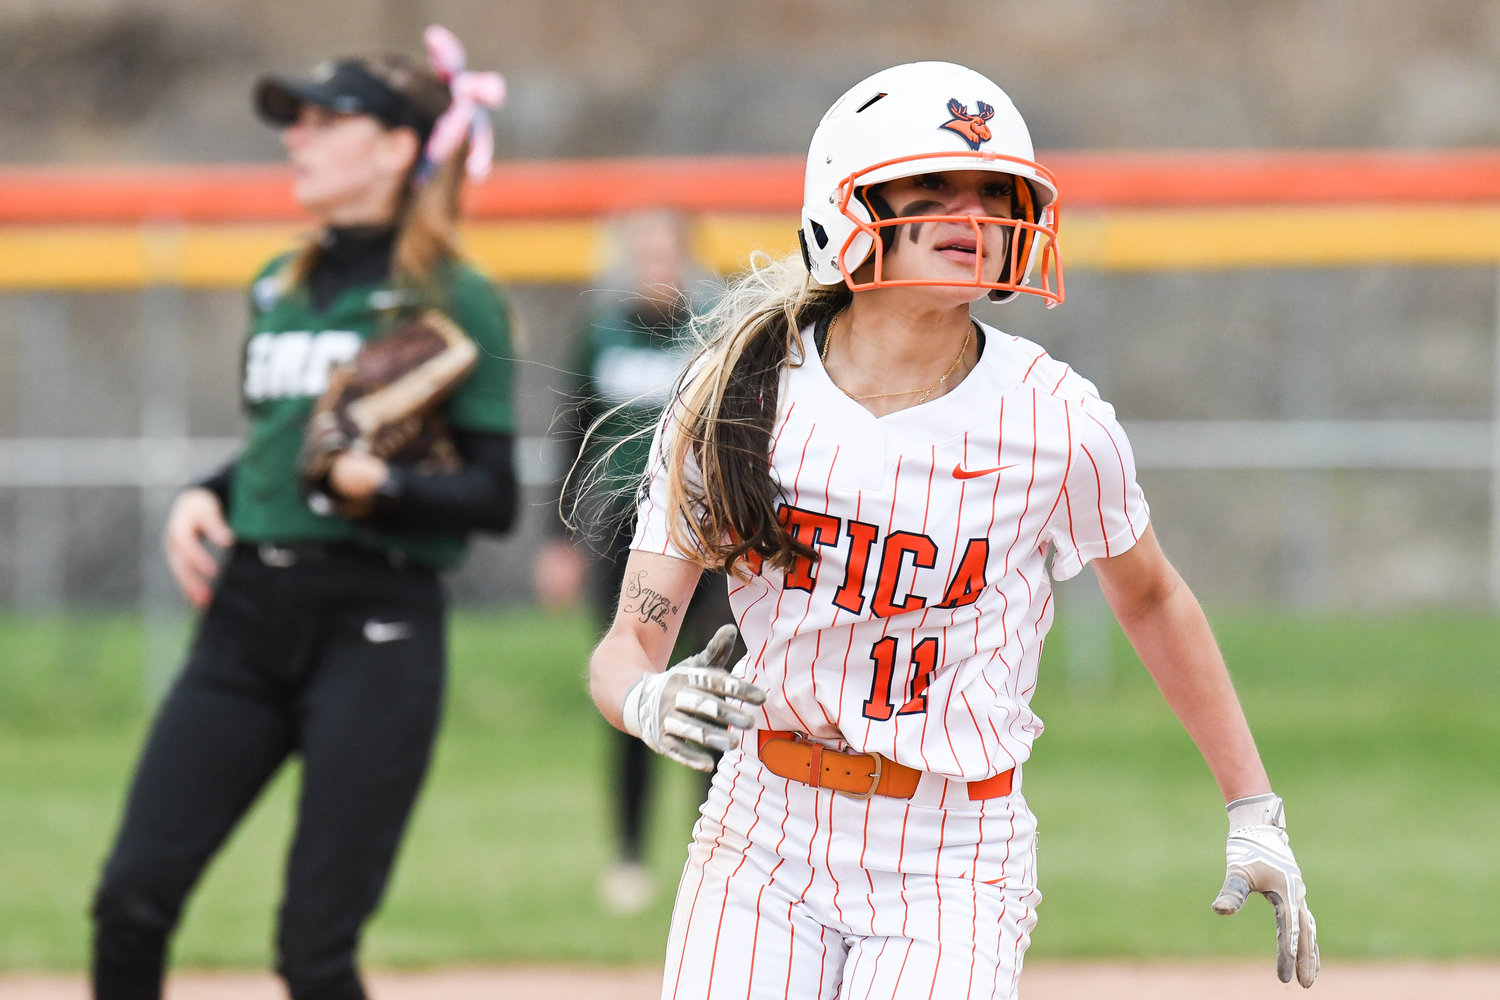 ROUNDING SECOND — Utica University player Abriana Wadley (11) rounds second base during game two of a doubleheader against Russell Sage on Friday at Greenman Softball Field.